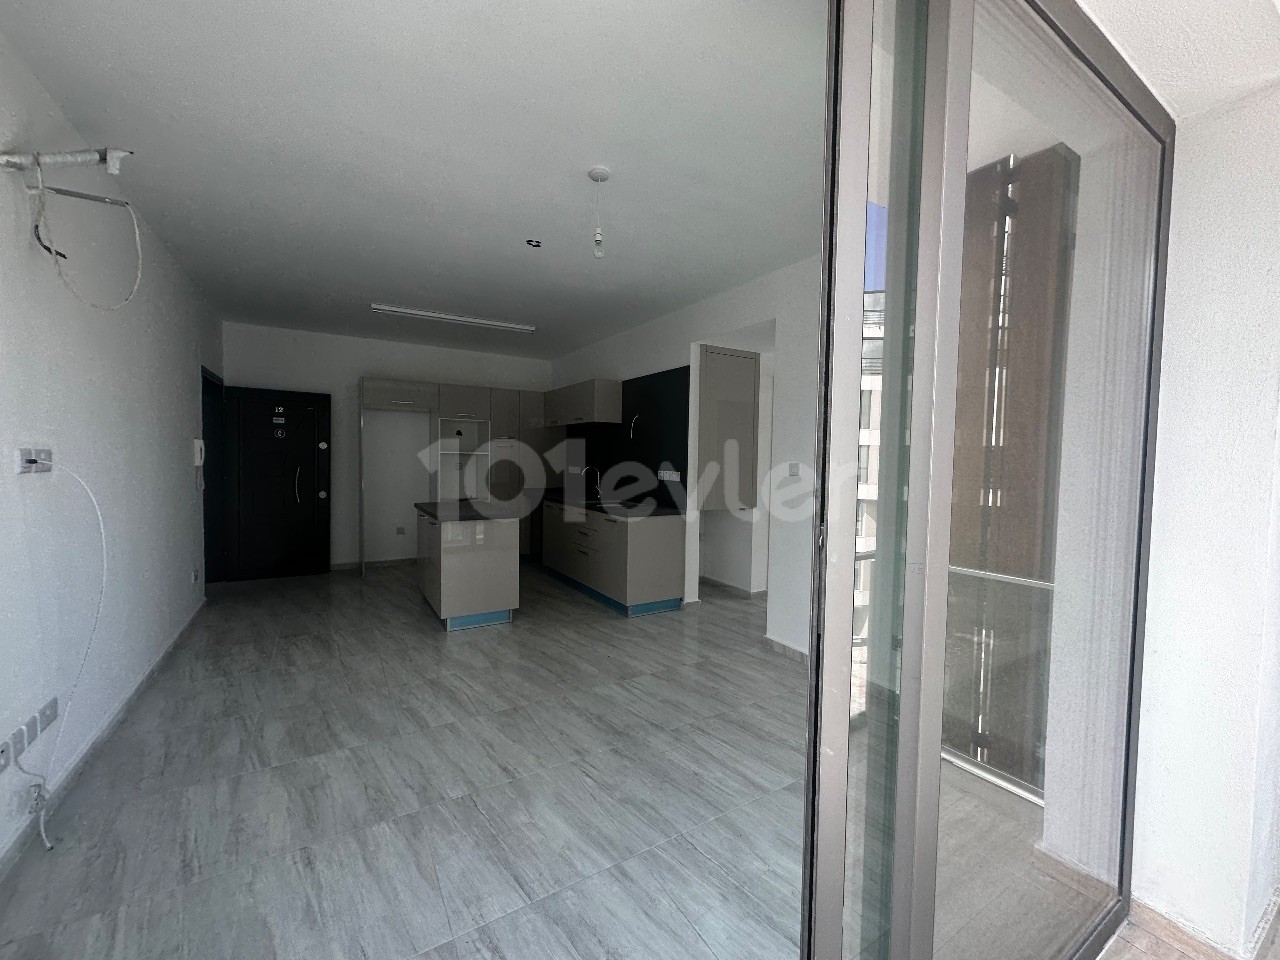 2+1 LUXURY APARTMENT WITH COMMERCIAL PERMIT IN THE CENTER OF GUINEA IN CENTRAL KINUM